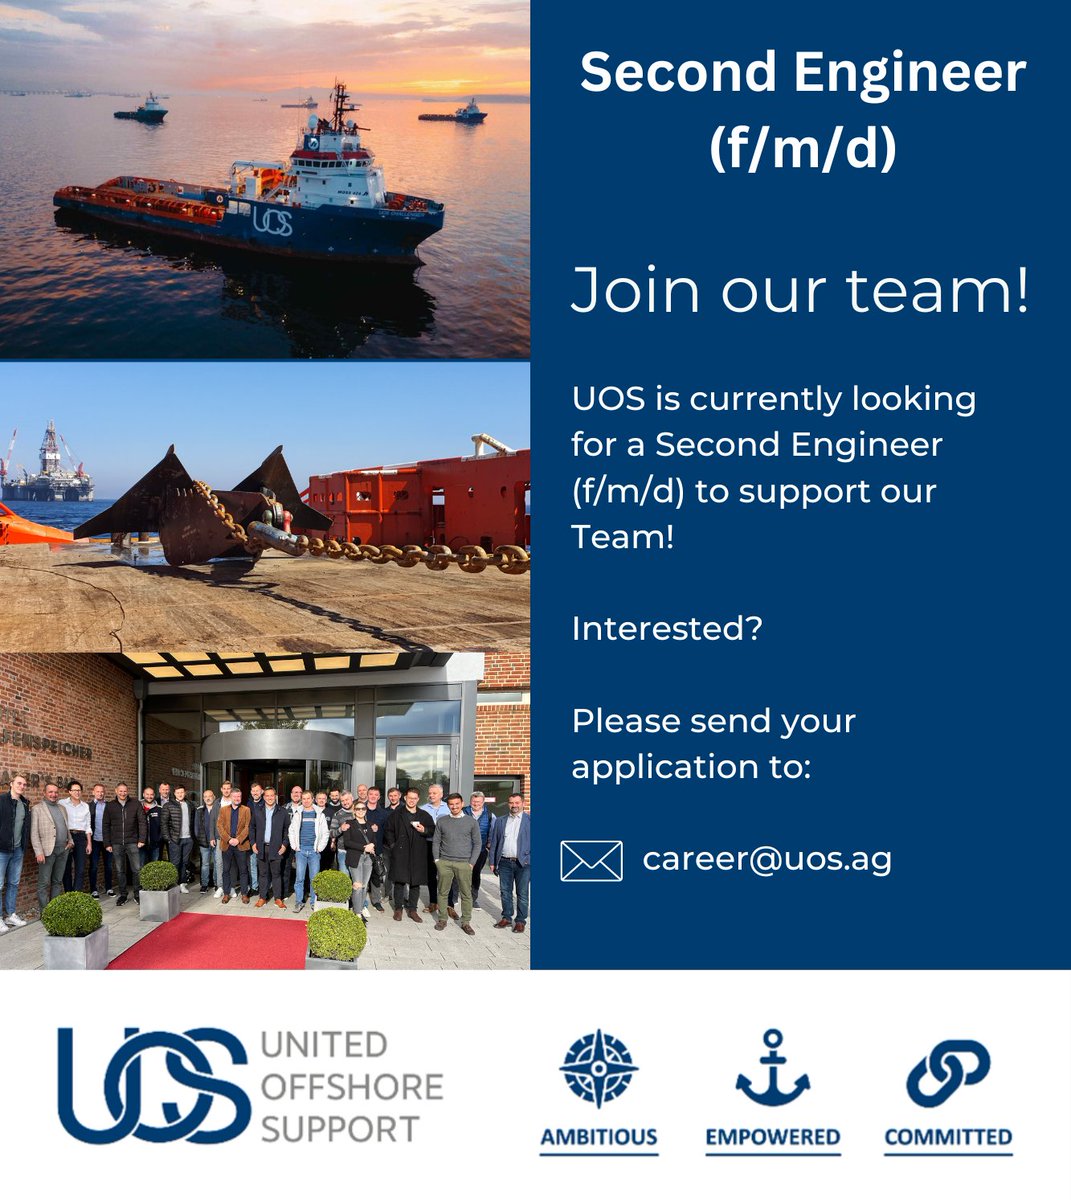 We are hiring! We are looking for a Second Engineer to join our team. For the full vacancy, please visit uos.ag/careers/
 #uos #vacancy #secondengineer #offshorejobs